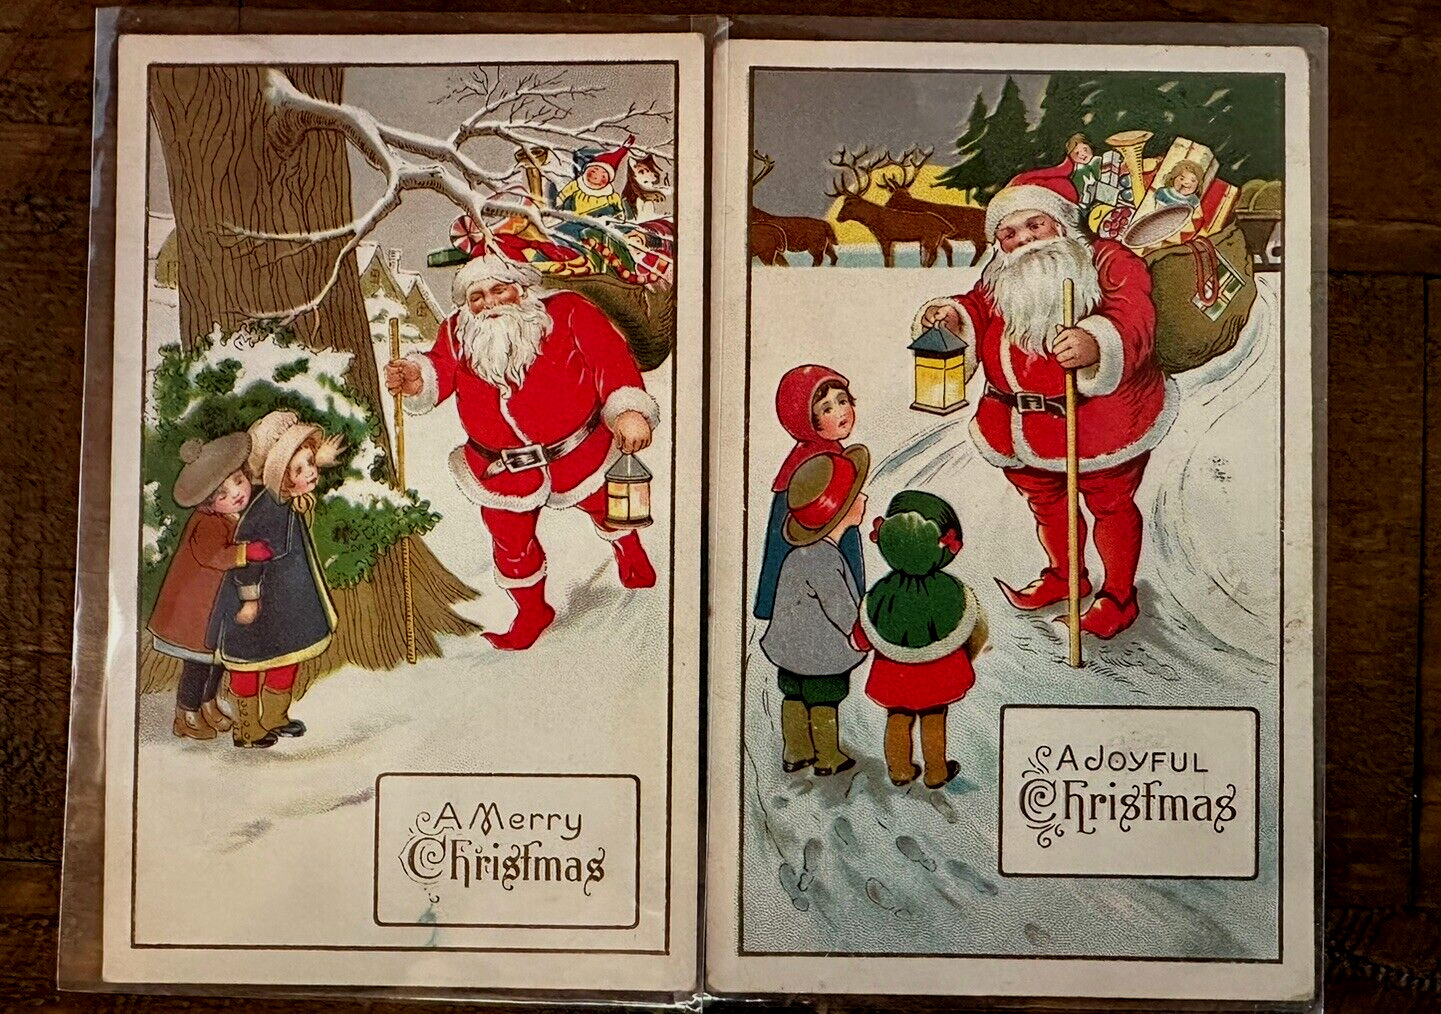 Lot of 2 ~Santa Claus with Children~Toys~Antique Christmas Postcards~h741